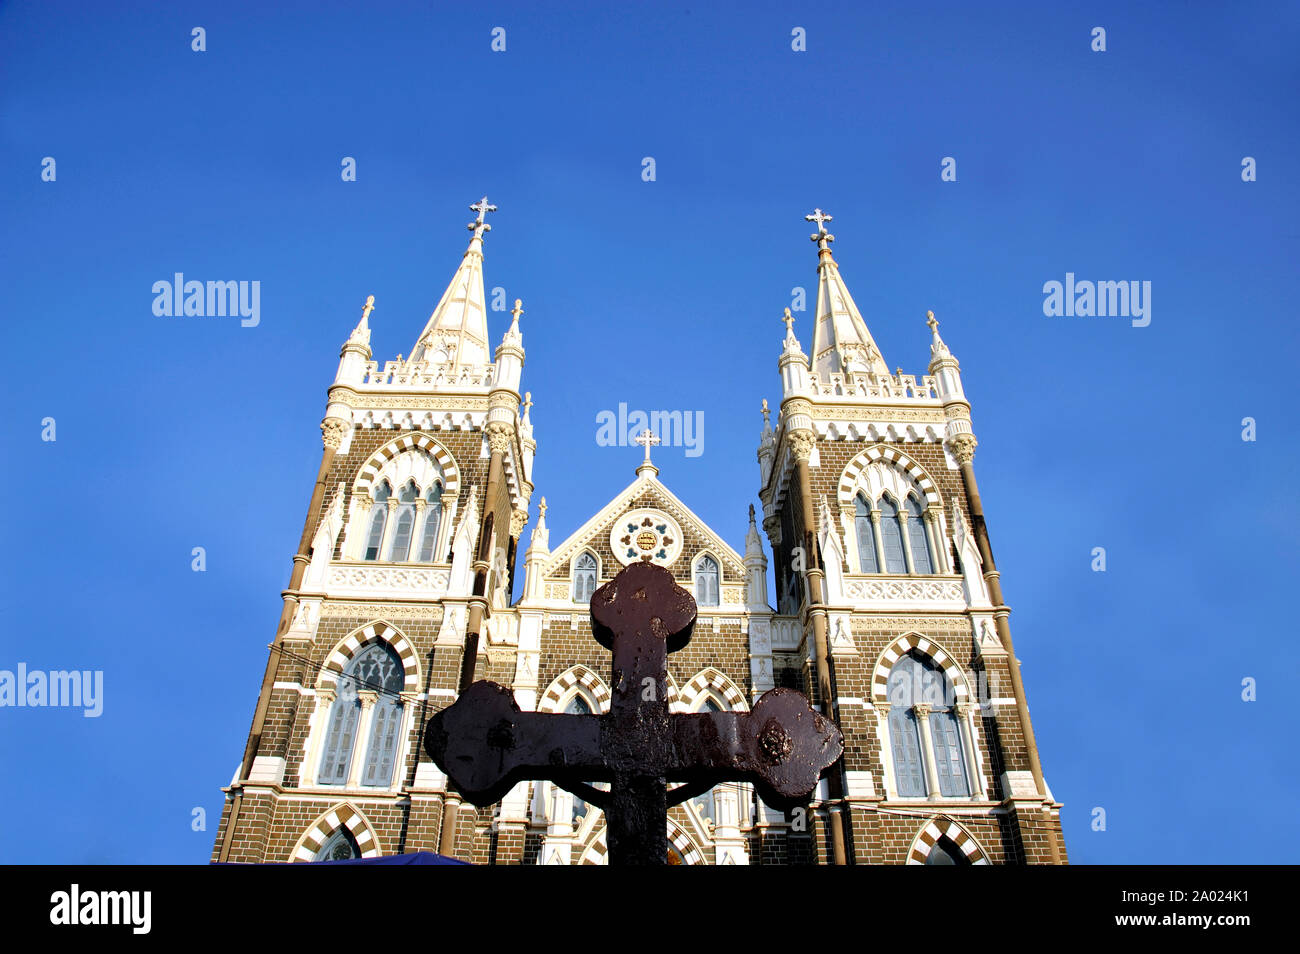 Mumbai, India, The Basilica of Our Lady of the Mount, more commonly known as Mount Mary Church, is a Roman Catholic Basilica located in Bandra. Stock Photo